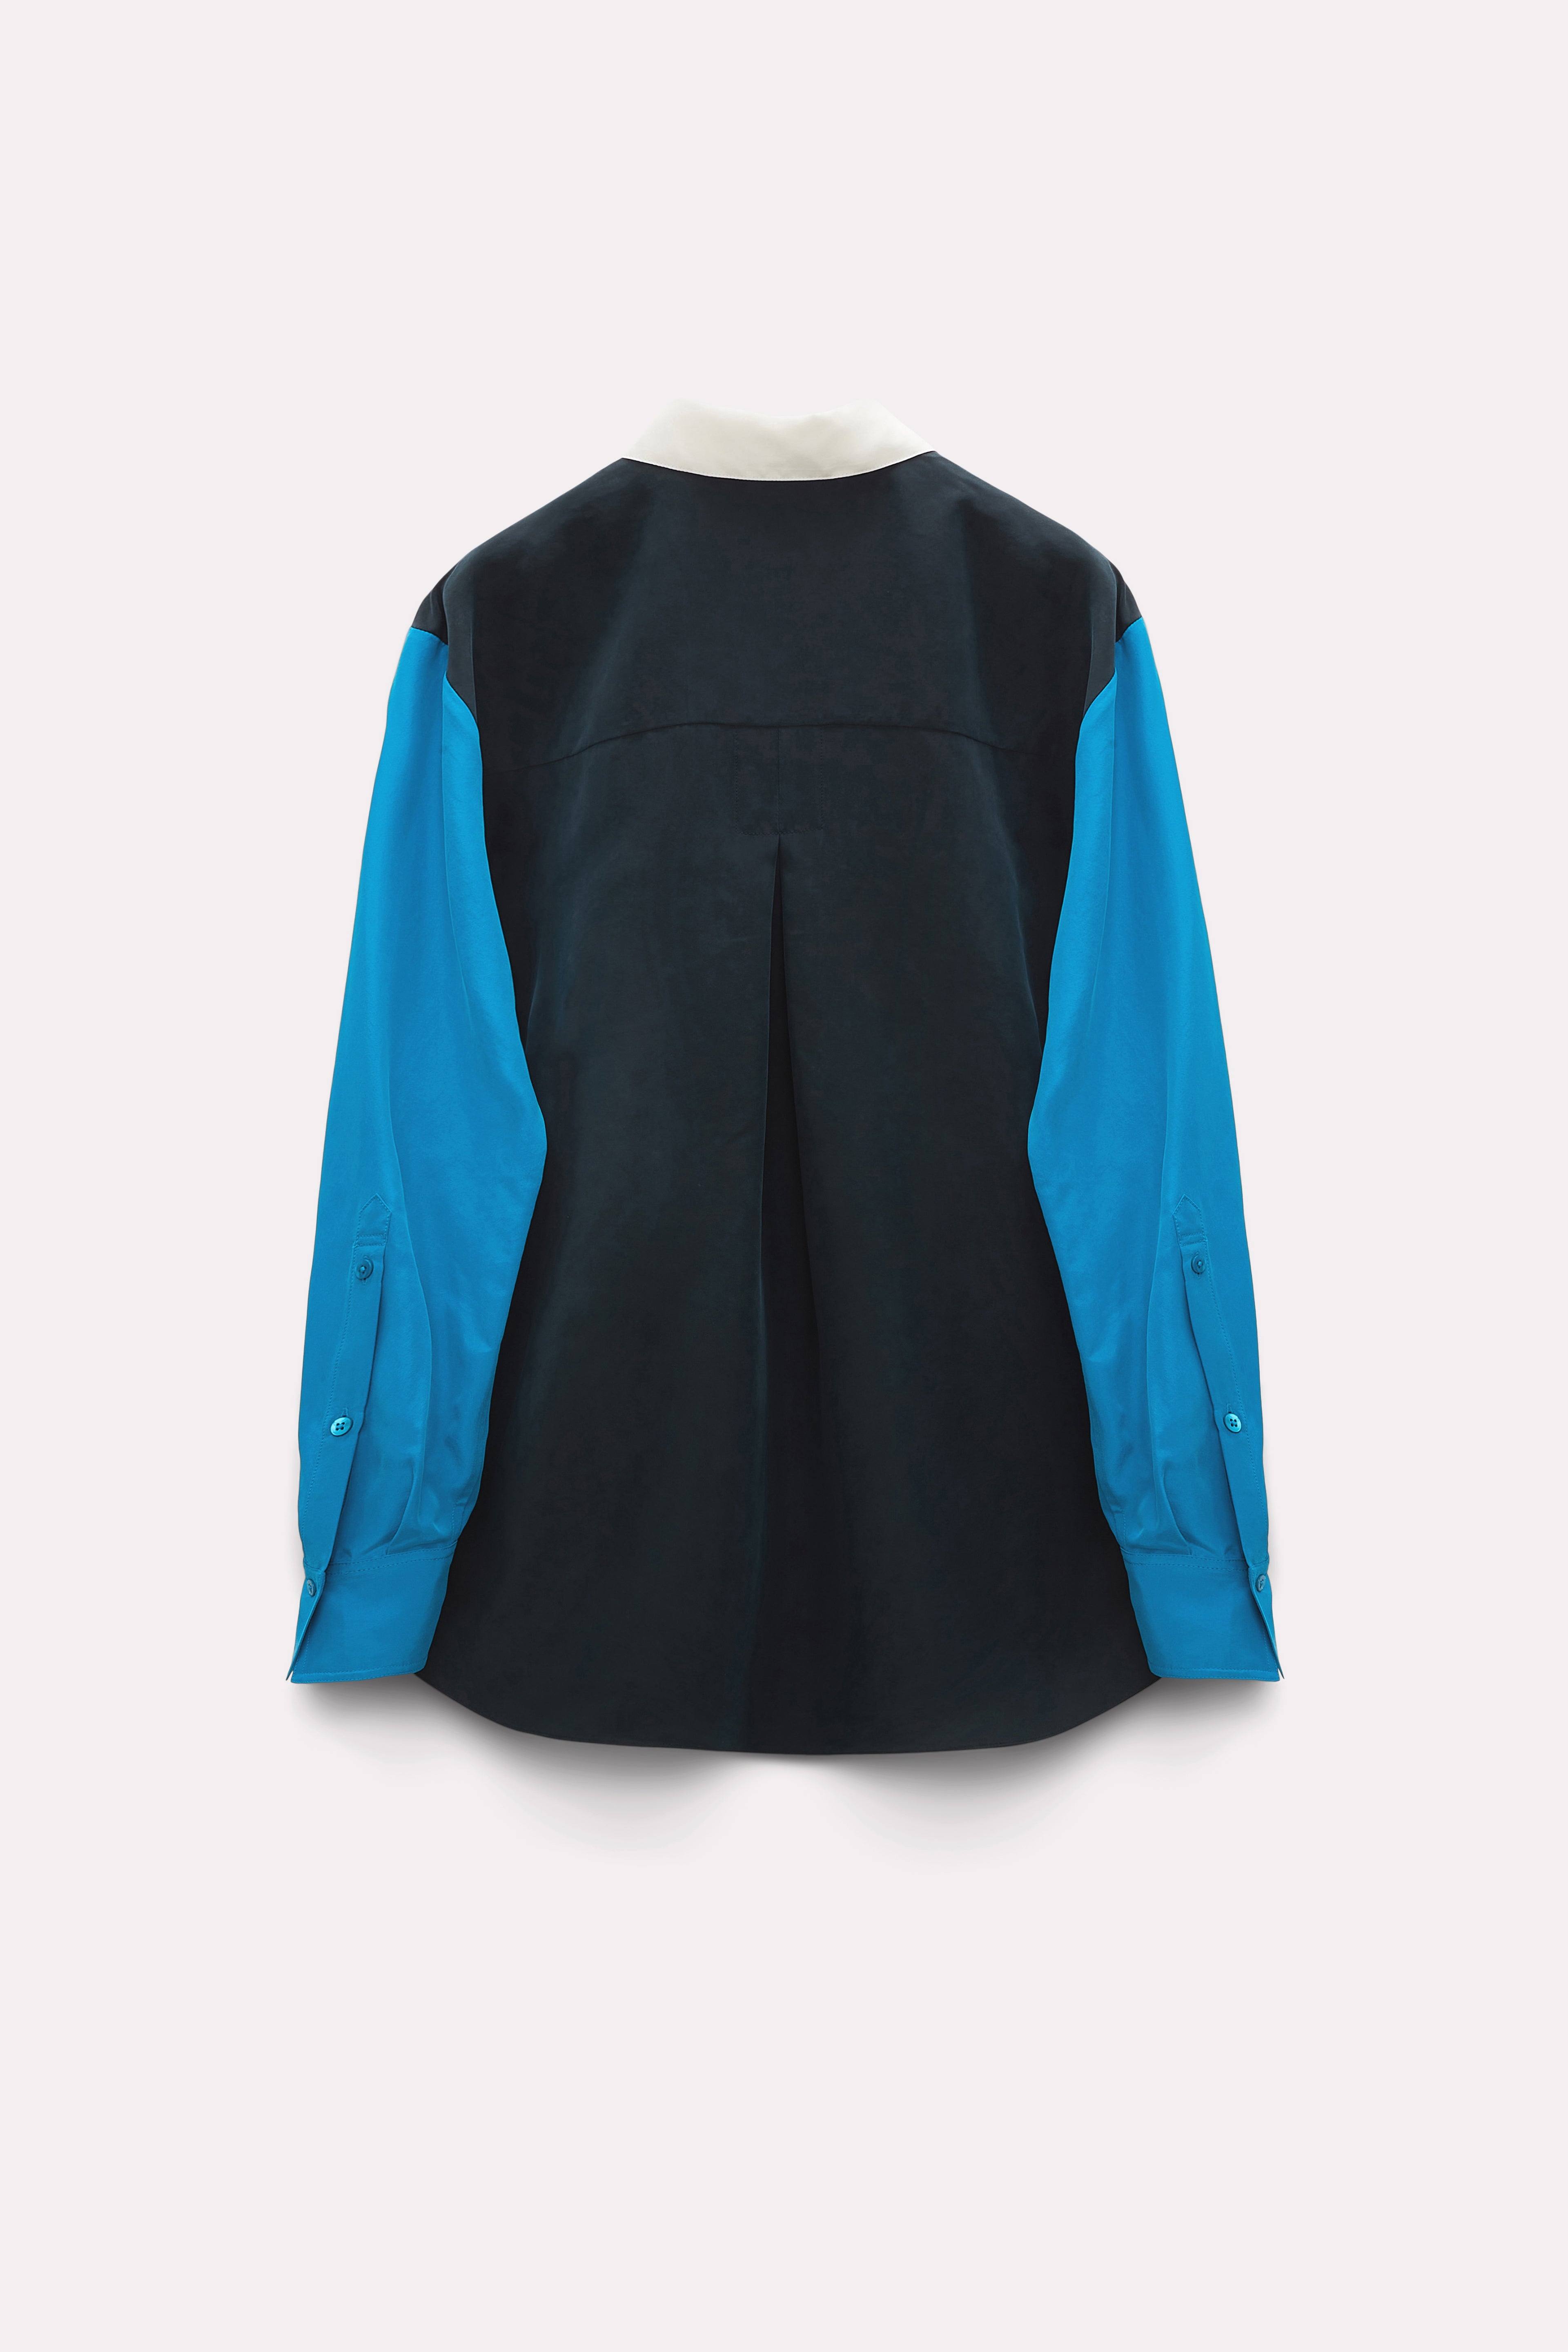 Dorothee-Schumacher-OUTLET-SALE-HERITAGE-EASE-blouse-Blusen-ARCHIVE-COLLECTION-2.jpg